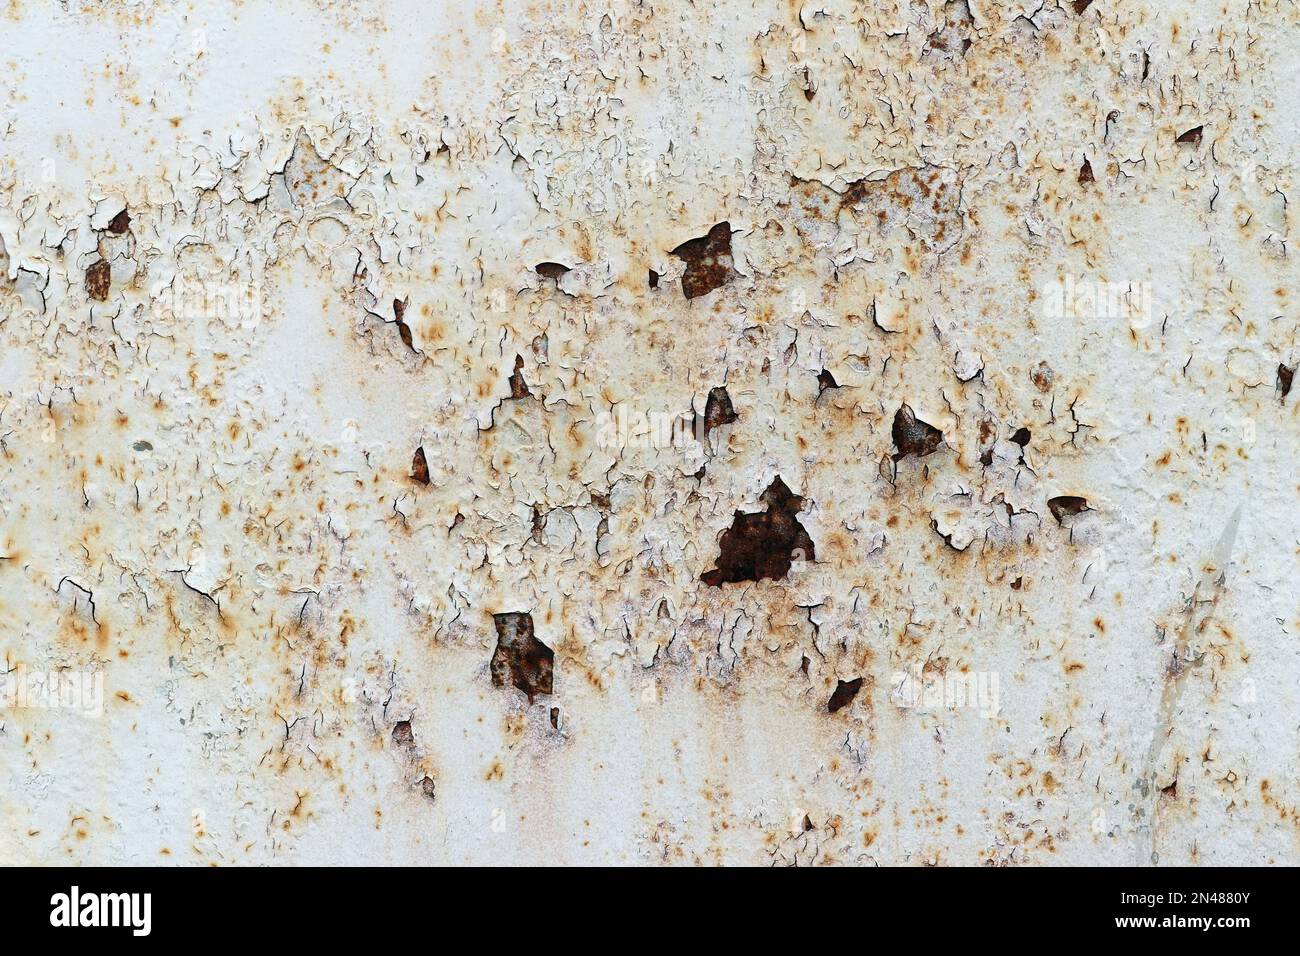 Detail of the flaking paint from the metal surface Stock Photo